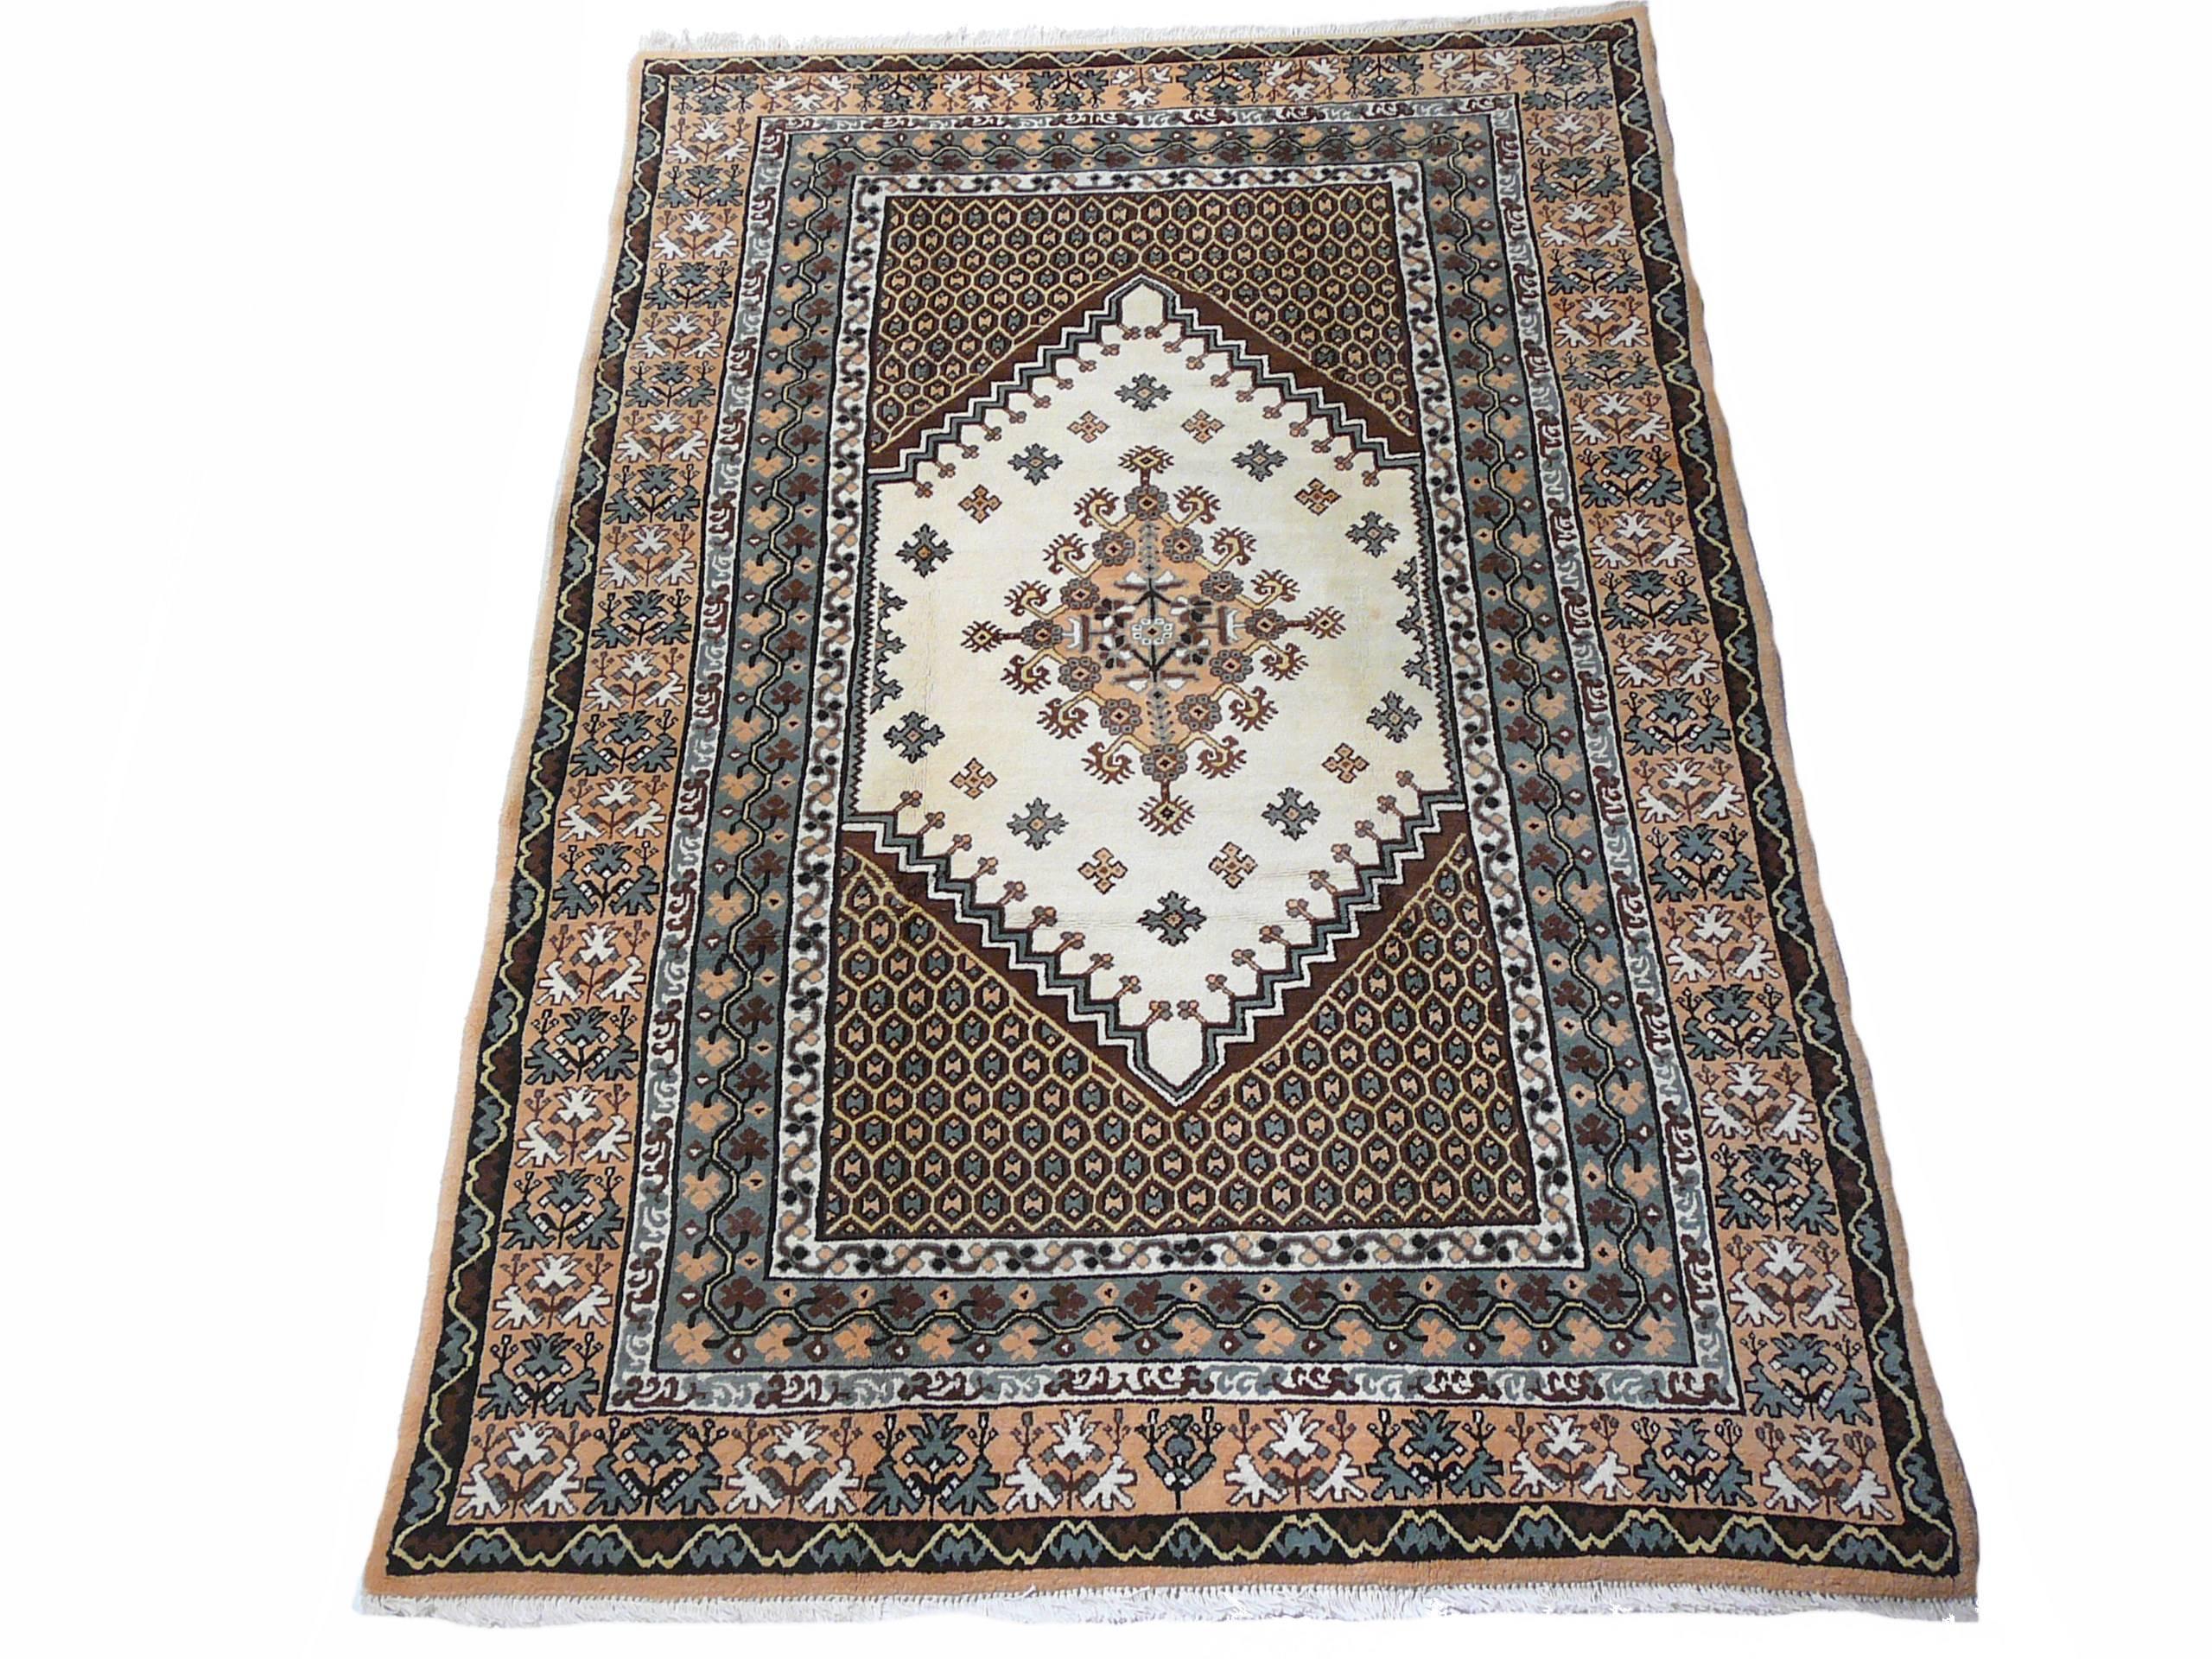 Very fine handknotted North african Rabat Berber rug. Great condition, well kept. Unusual Color combination with creme, beiges and grey.

The Djoharian Design Collection is located in Germany, all our rugs are shipped from there. We are licensed